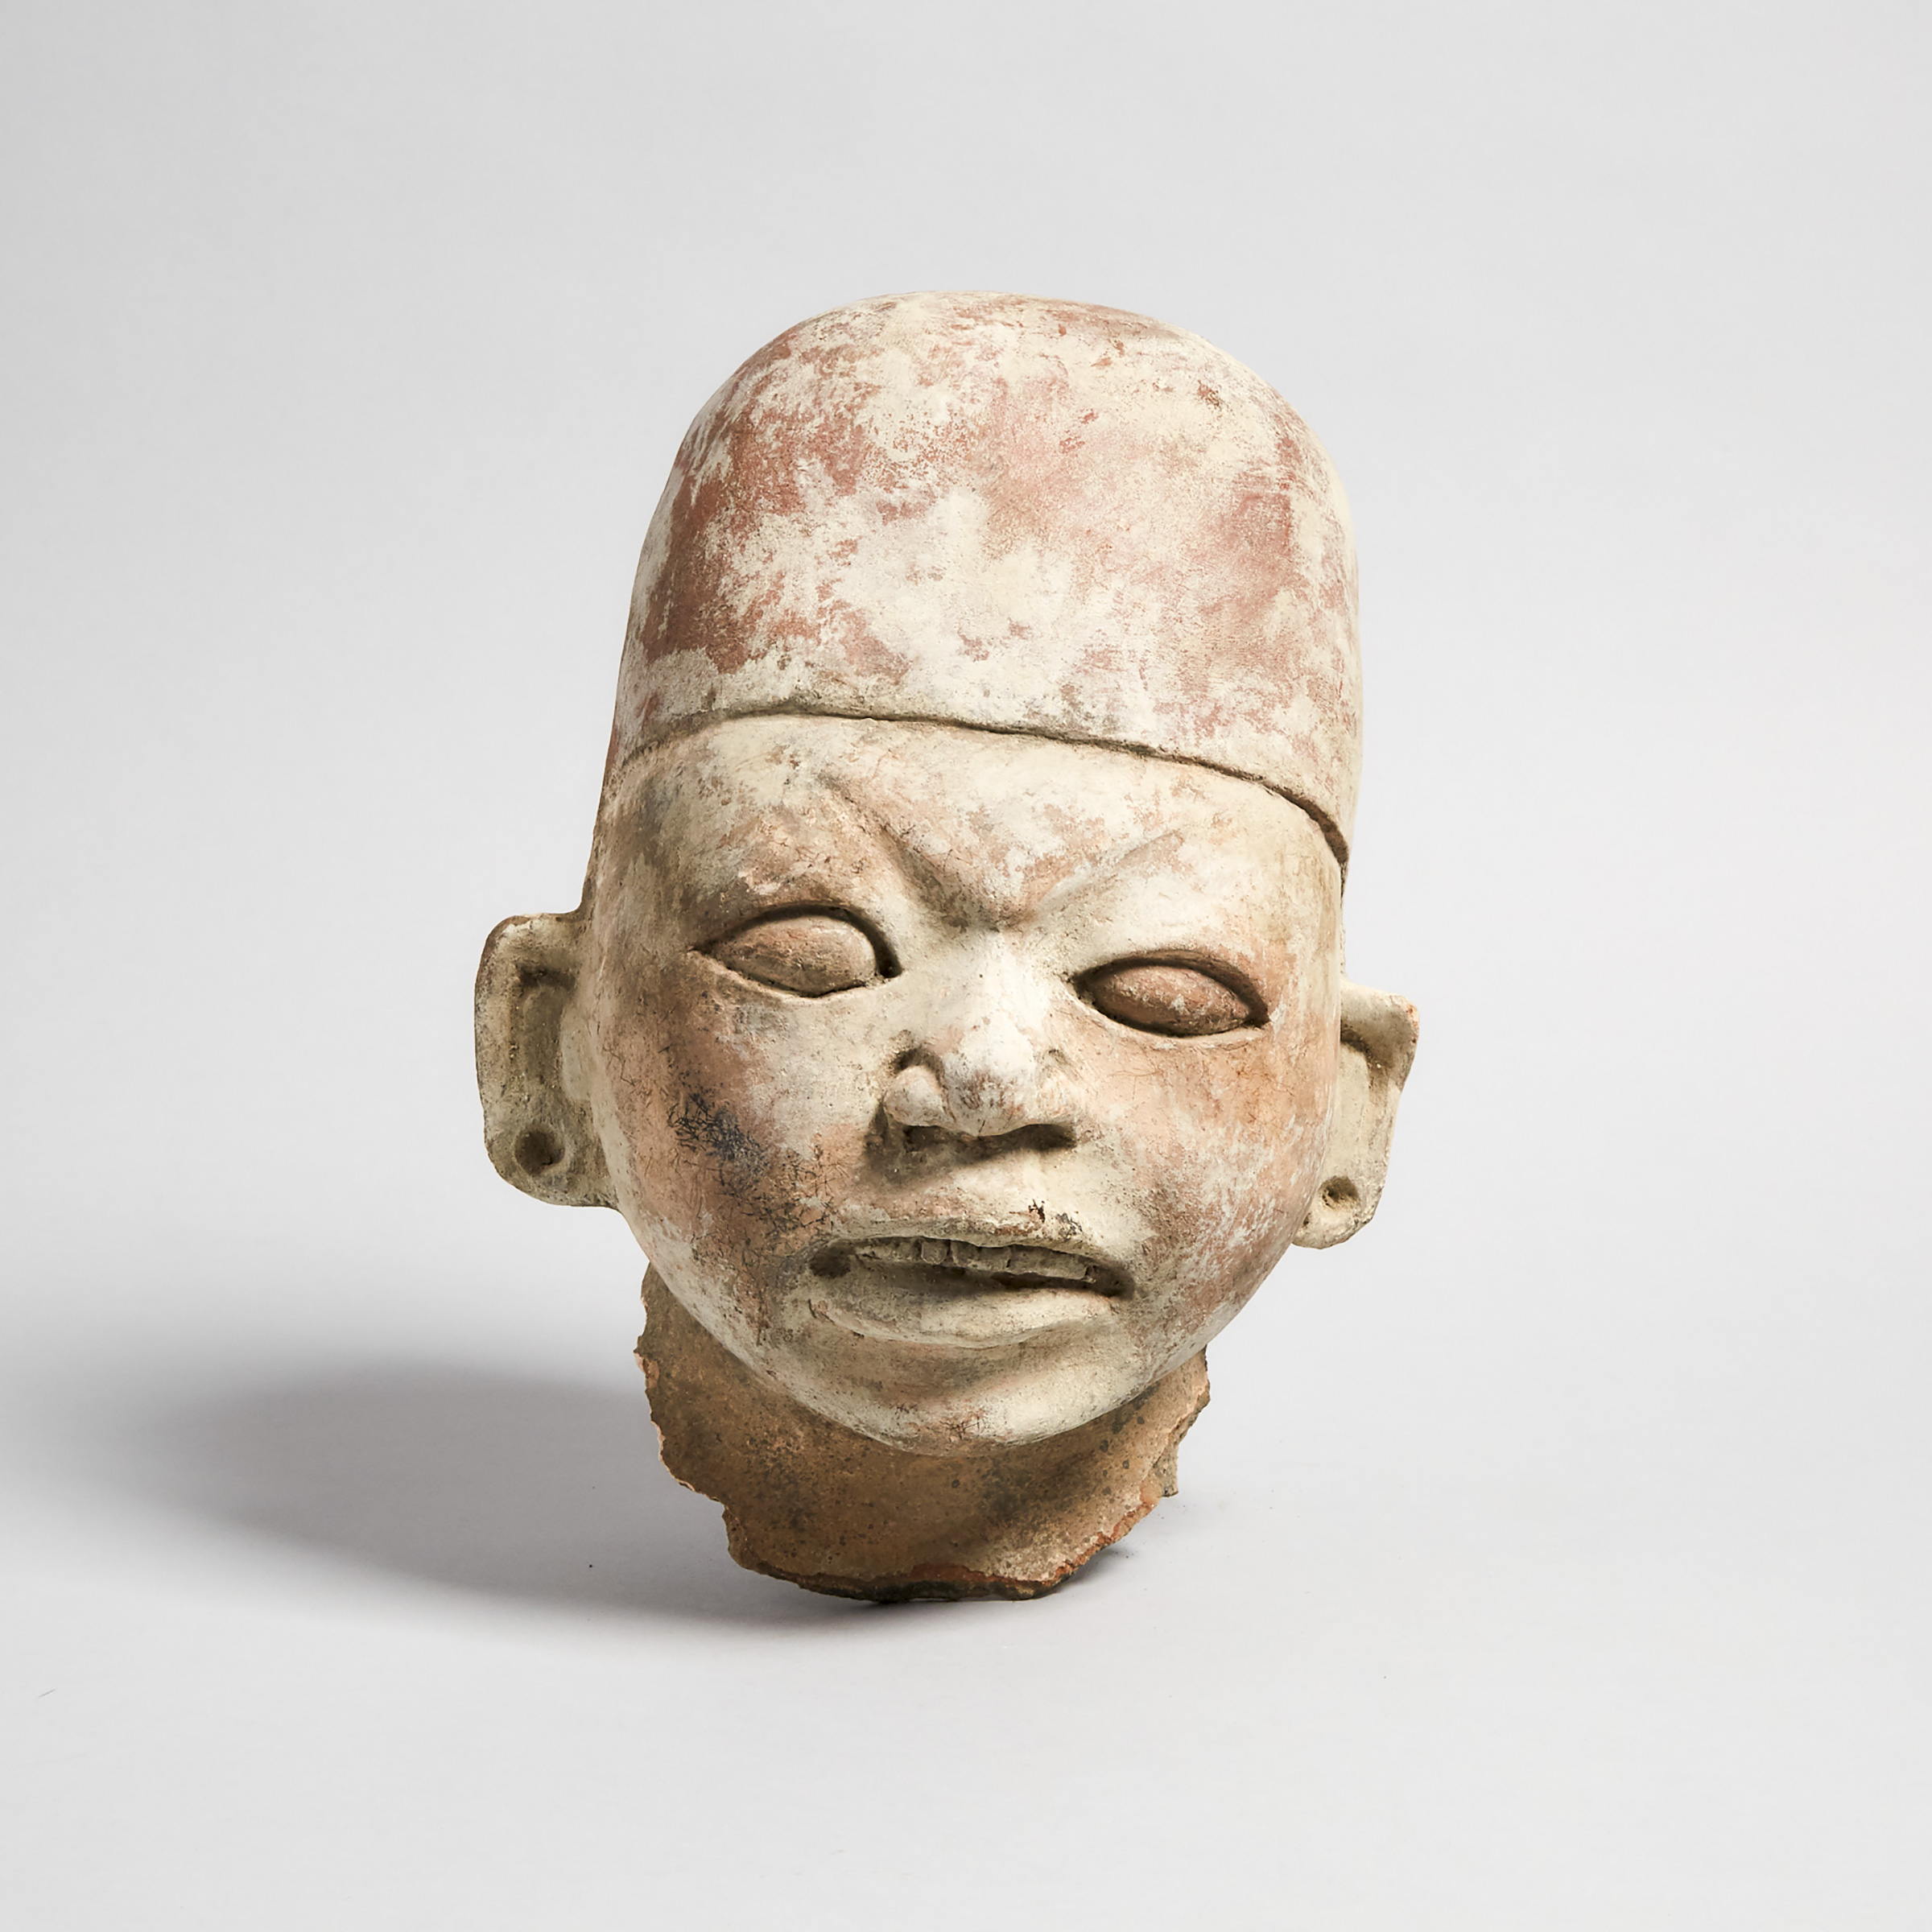 Chinese Painted Terracotta Head Fragment of a Tomb Figure, Qin Dynasty, 221-206 B.C.